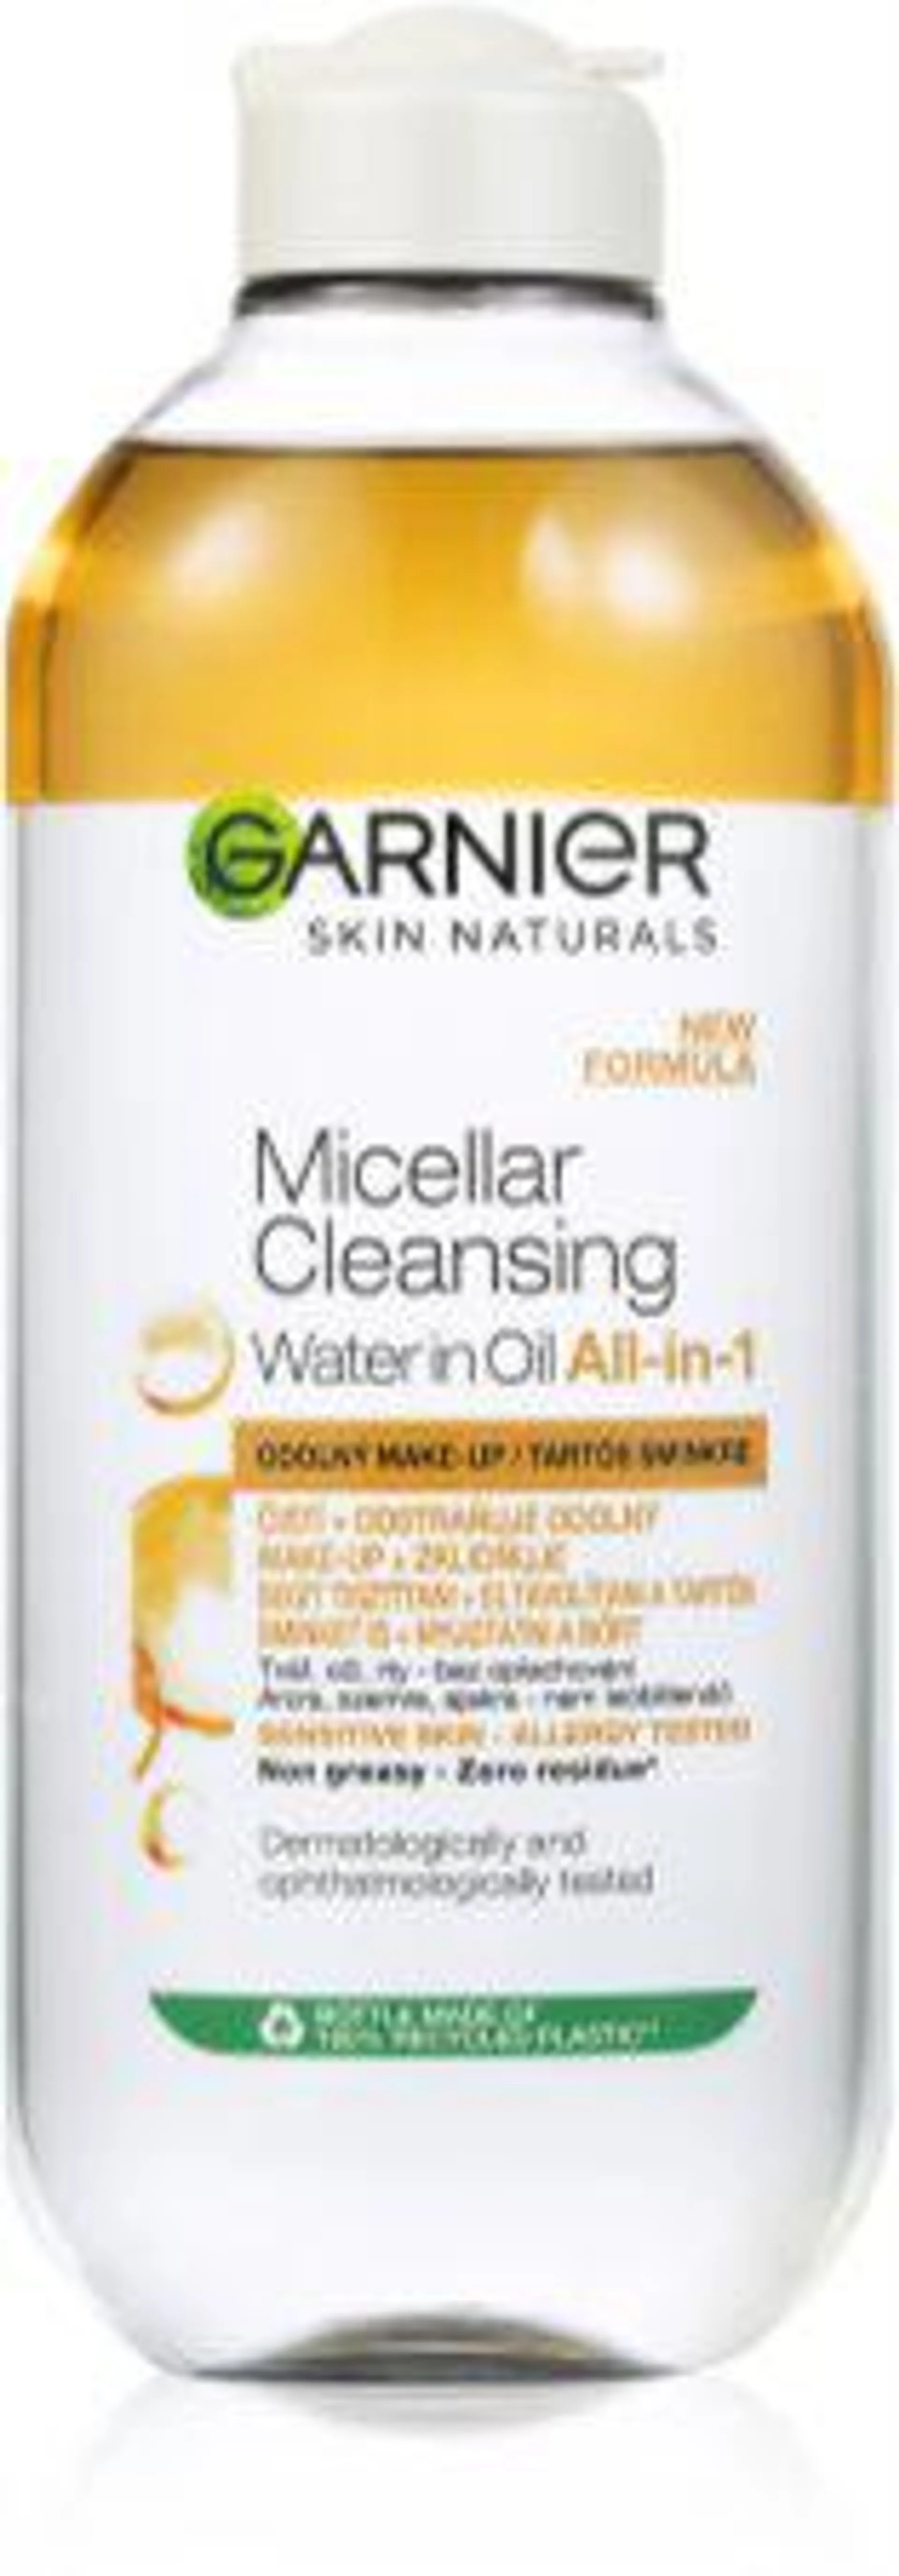 Two-Phase Micellar Water 3-in-1